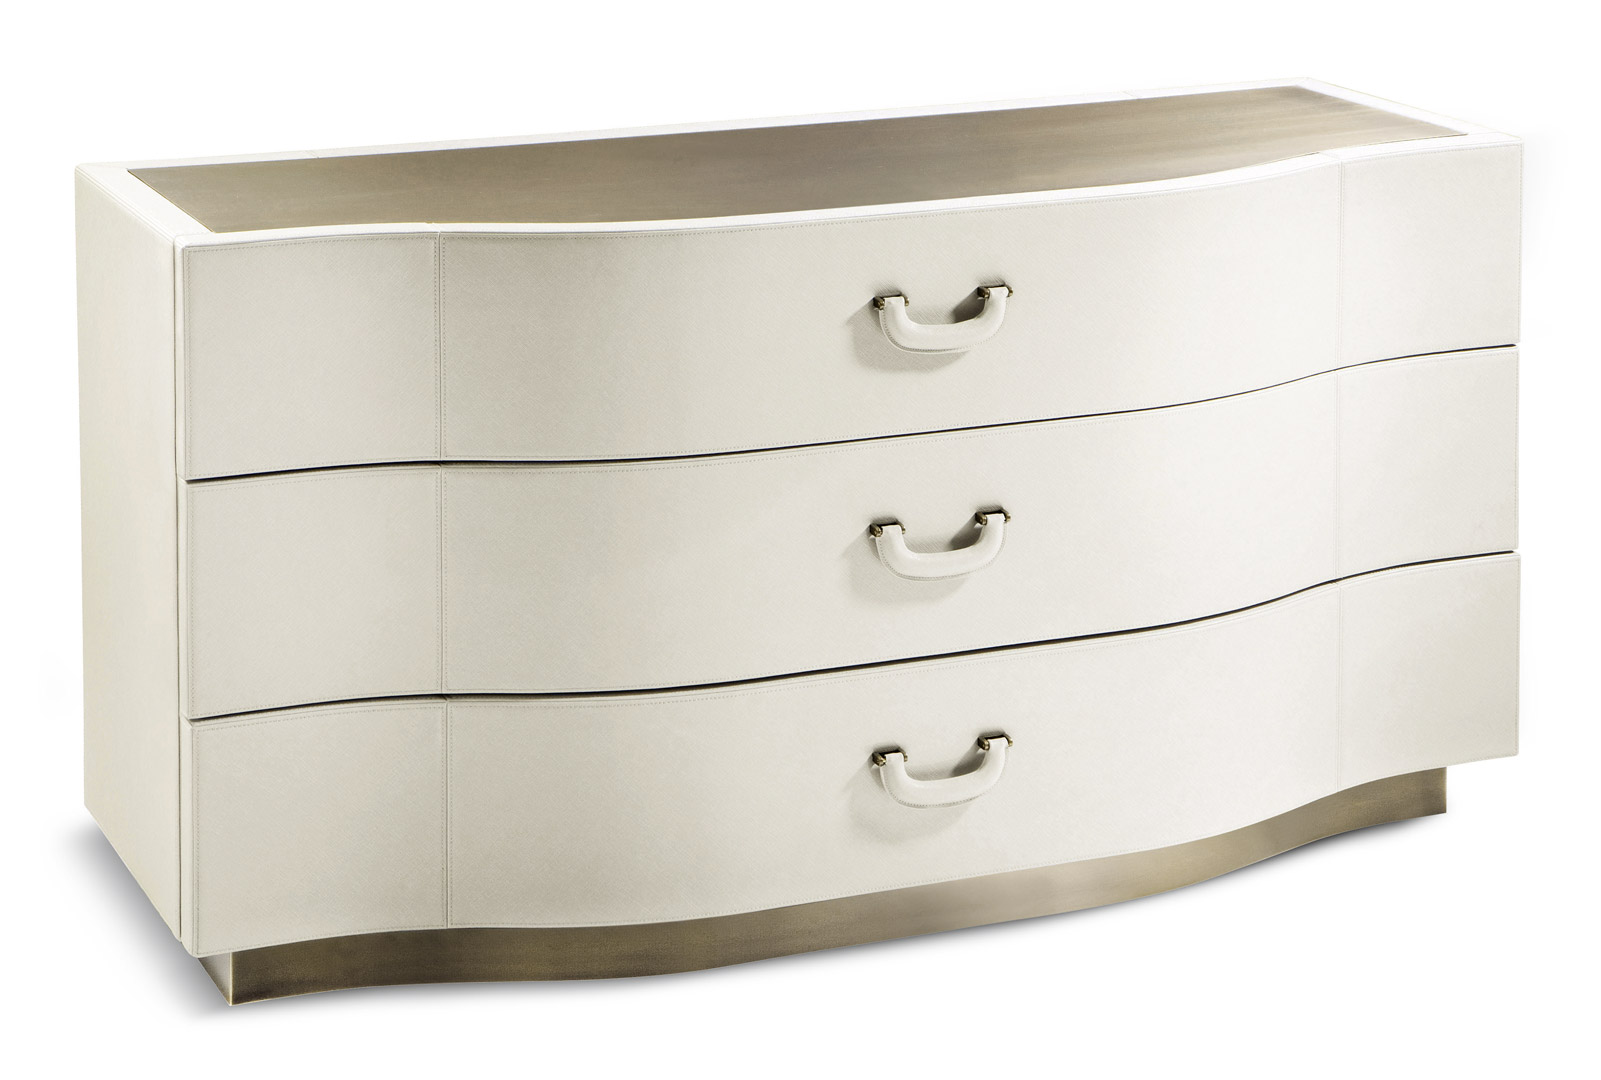 Valentino chest of drawers - Cantori